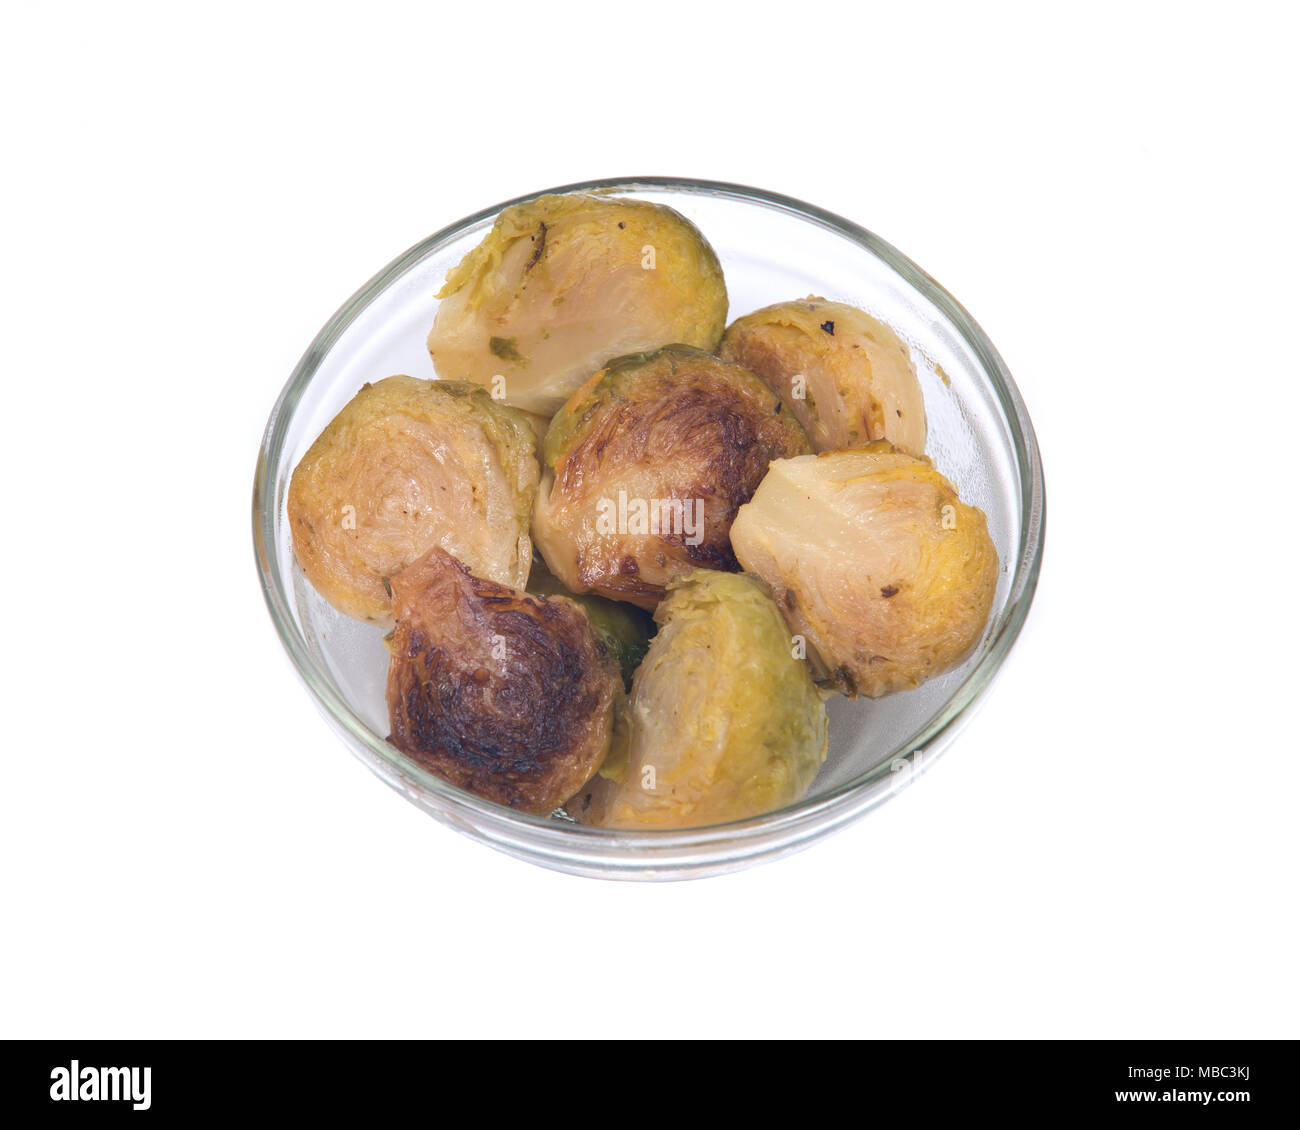 Roasted brussels sprouts in clear glass dish isolated on white background Stock Photo